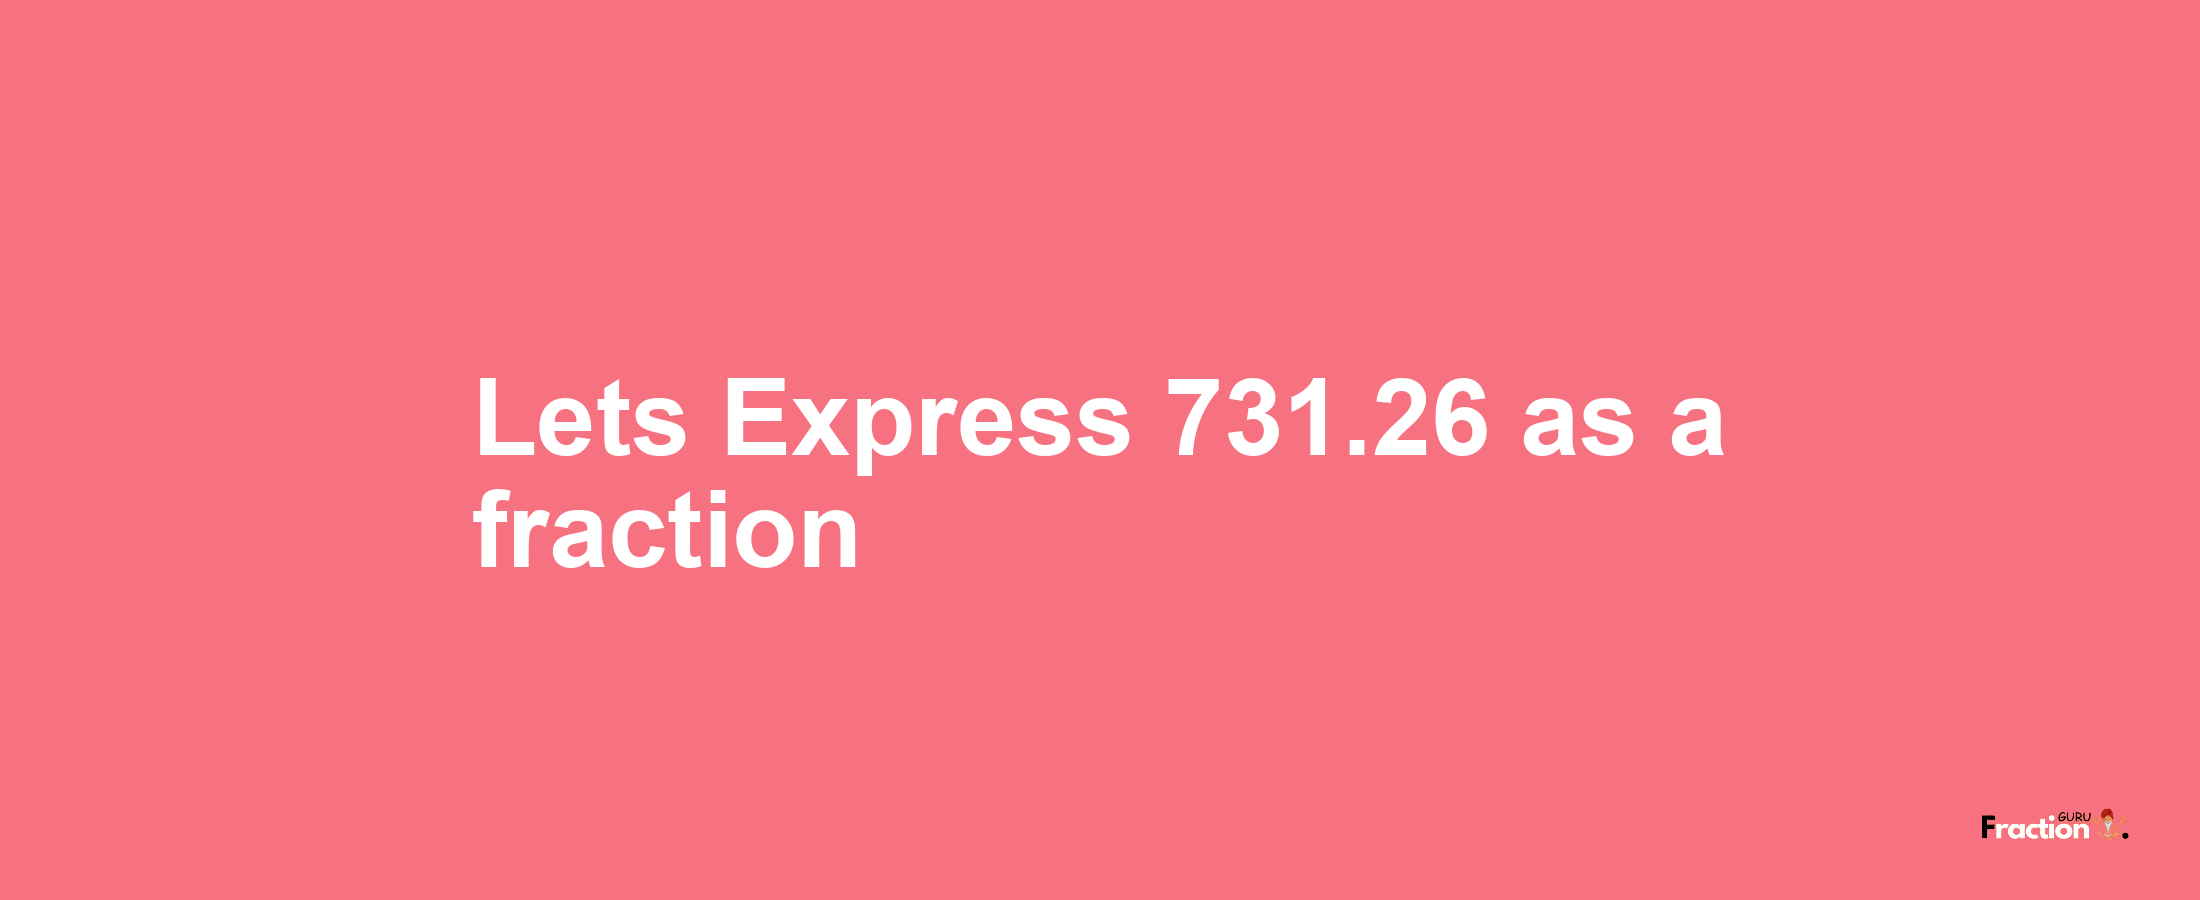 Lets Express 731.26 as afraction